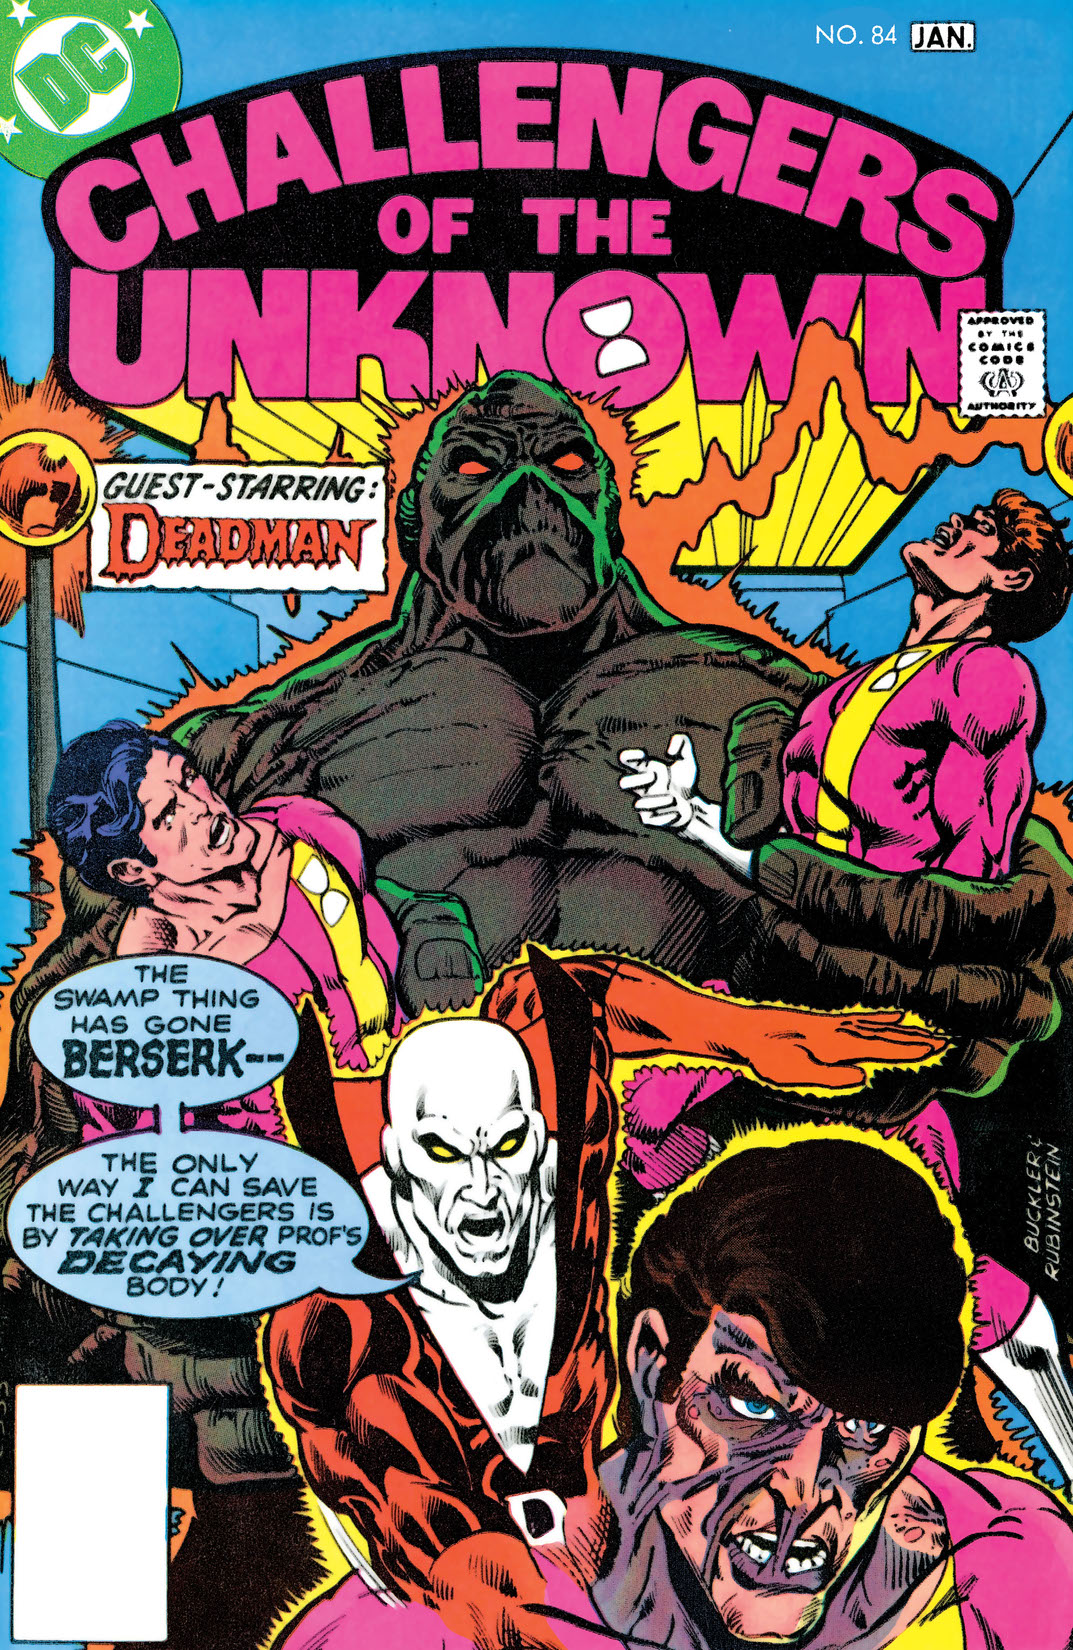 Challengers of the Unknown (1958-) #84 preview images